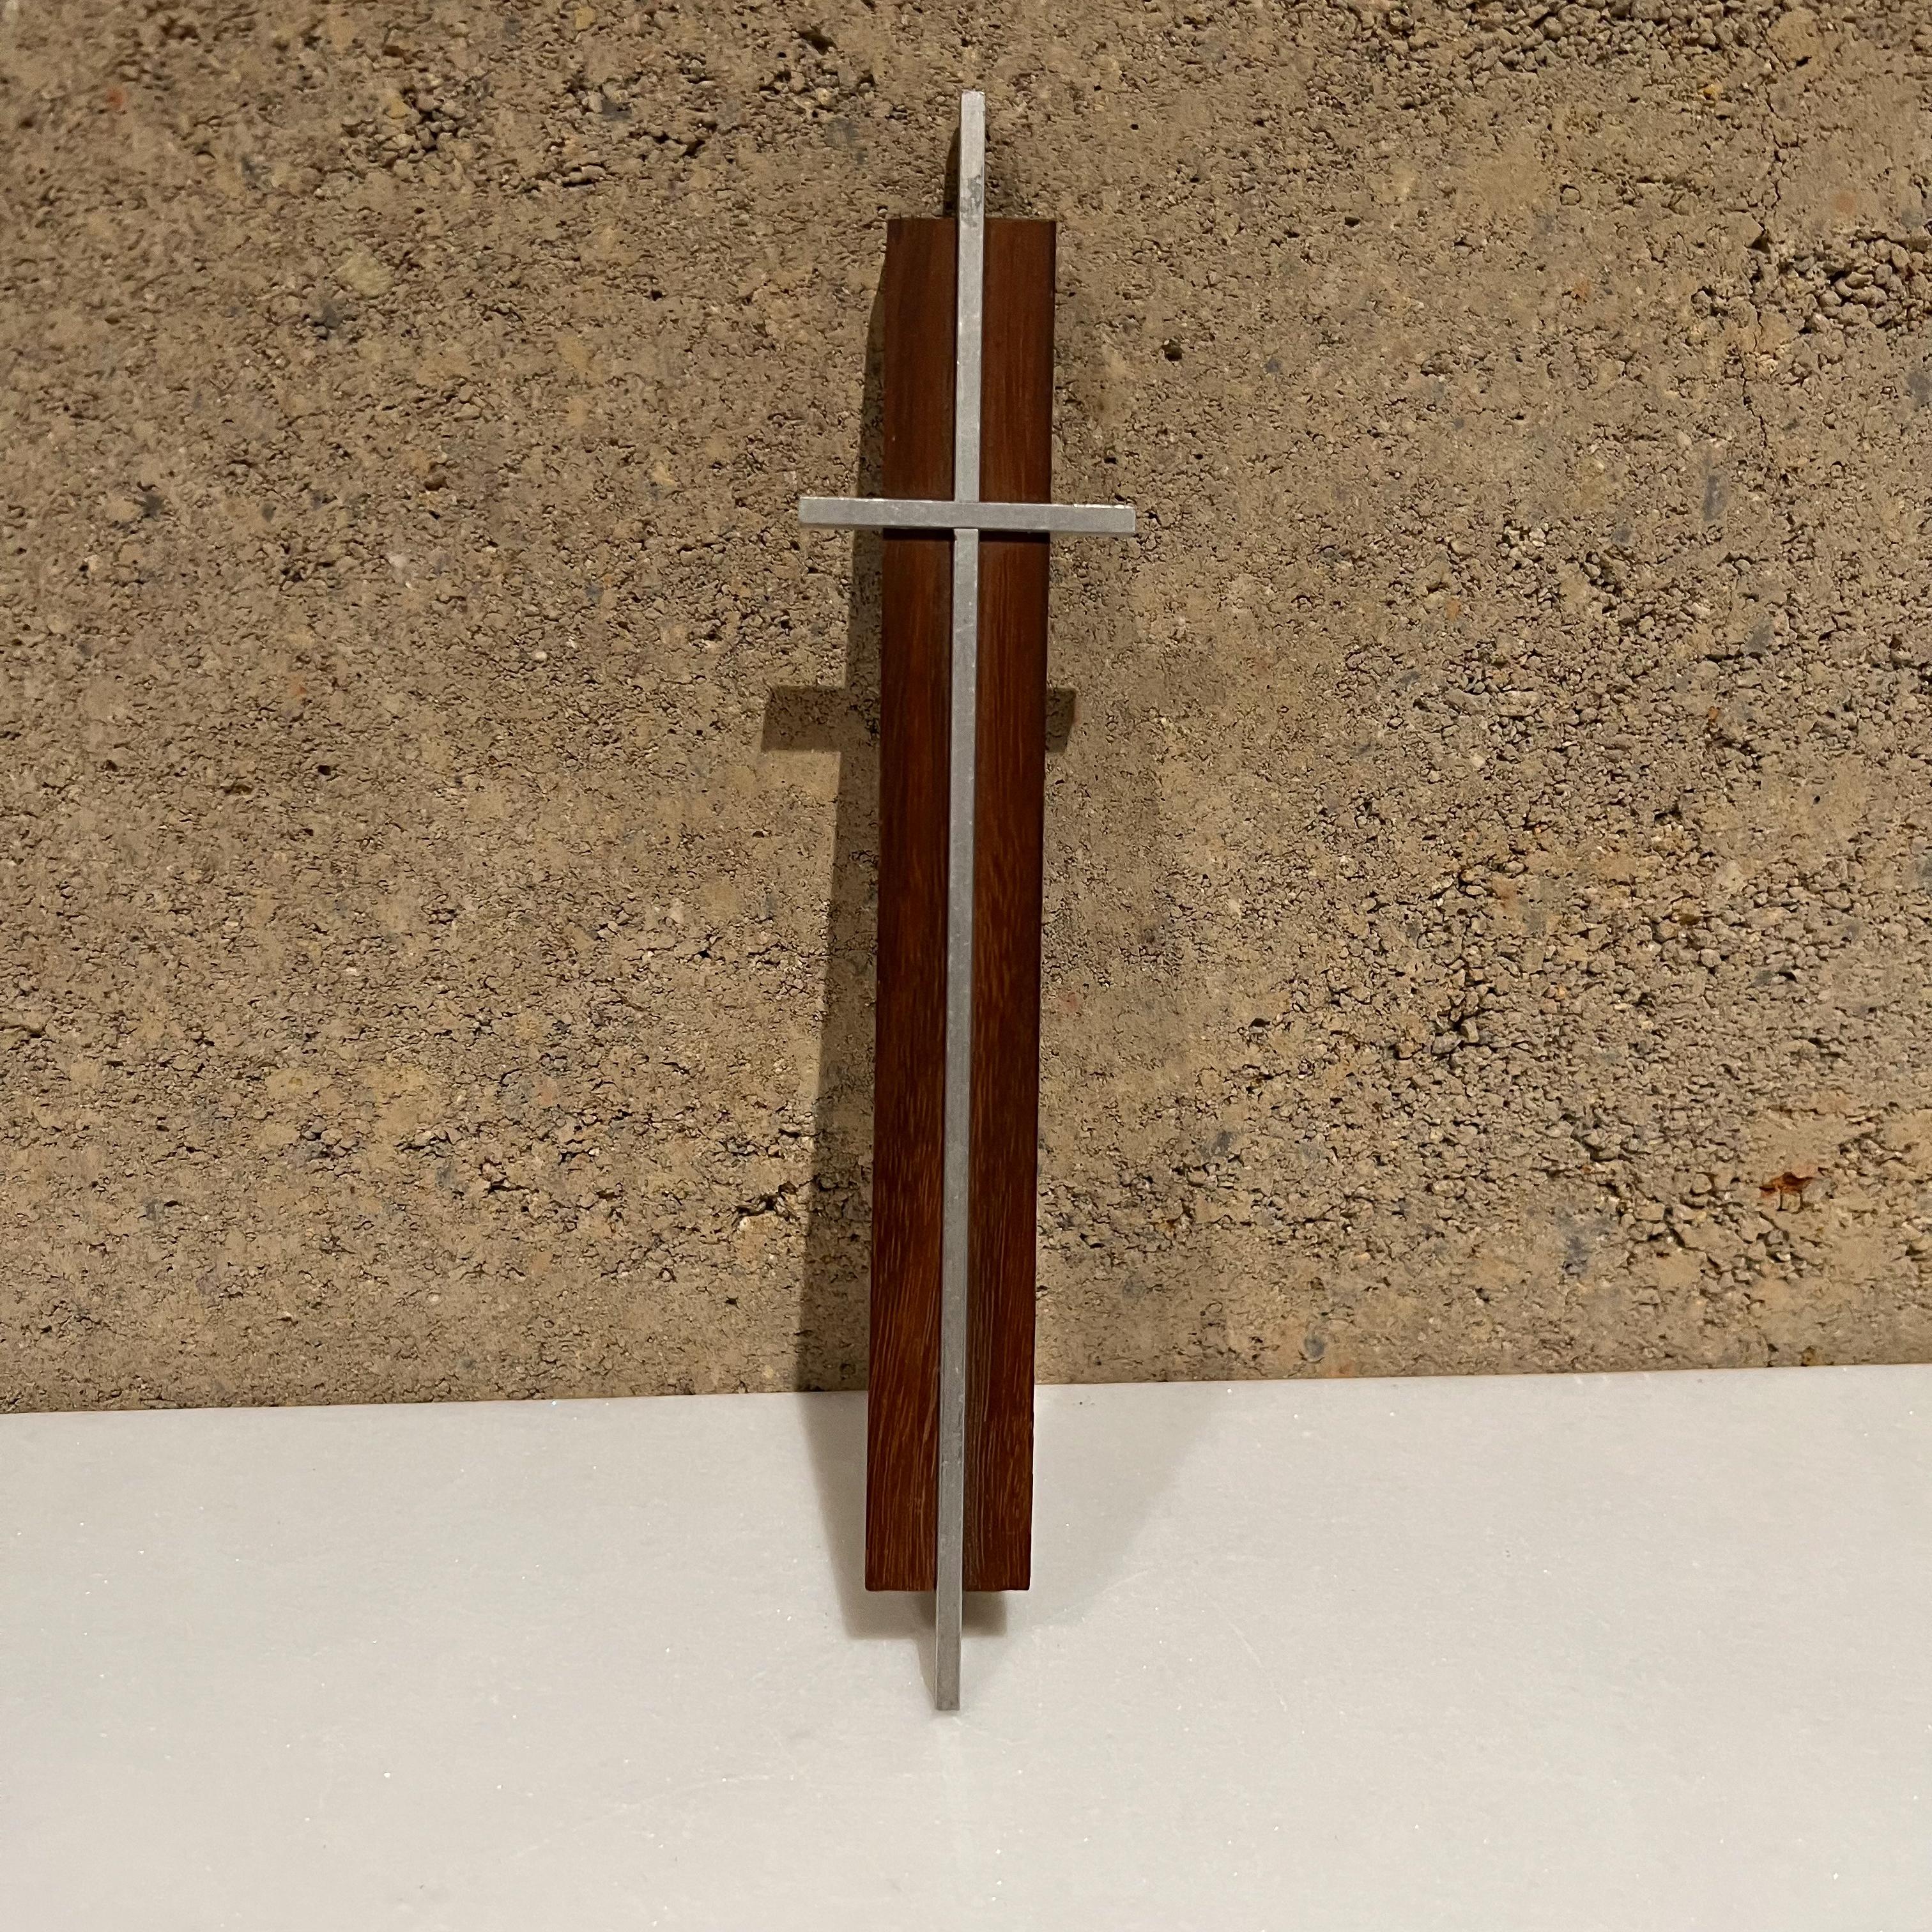 1960s Modernist Cross crucifix in wood and aluminum clean modern minimalist midcentury design
Measures: 8.63 tall x 1.75 wide x .5 deep
Stamped on the back.
Preowned vintage unrestored condition.
See images provided.

